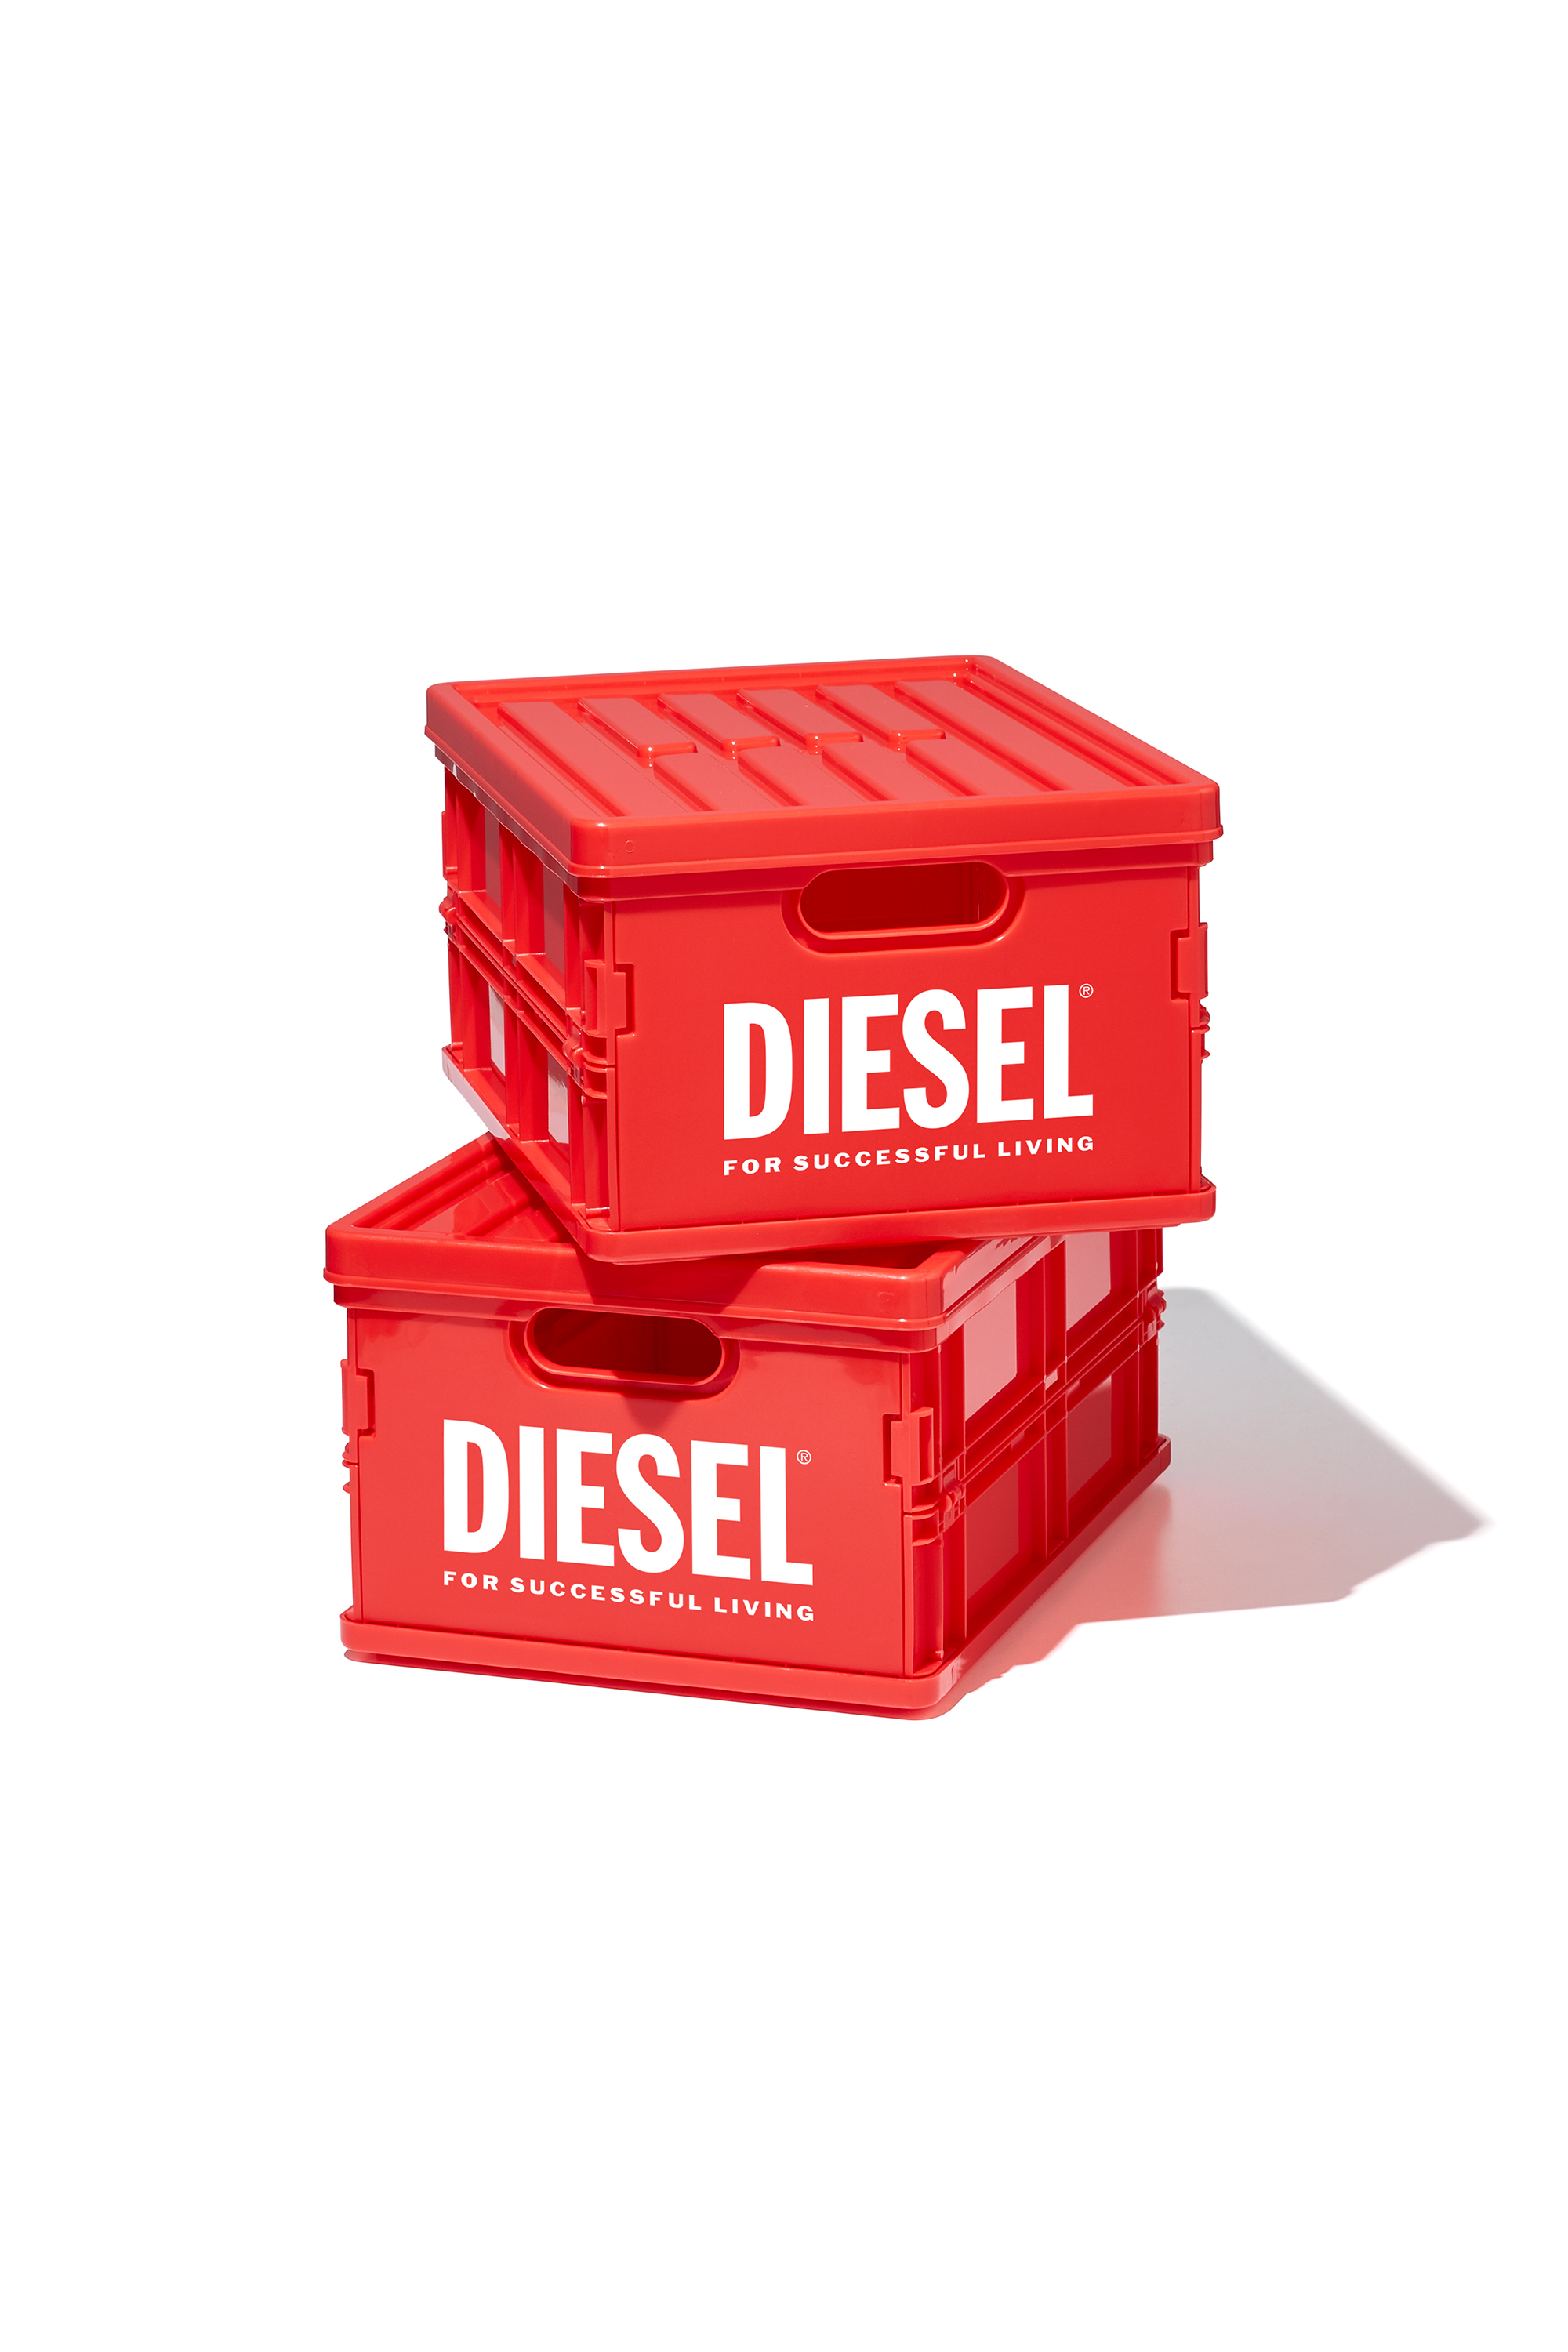 Diesel - CONTAINER BOX SET (RED), レッド - Image 1